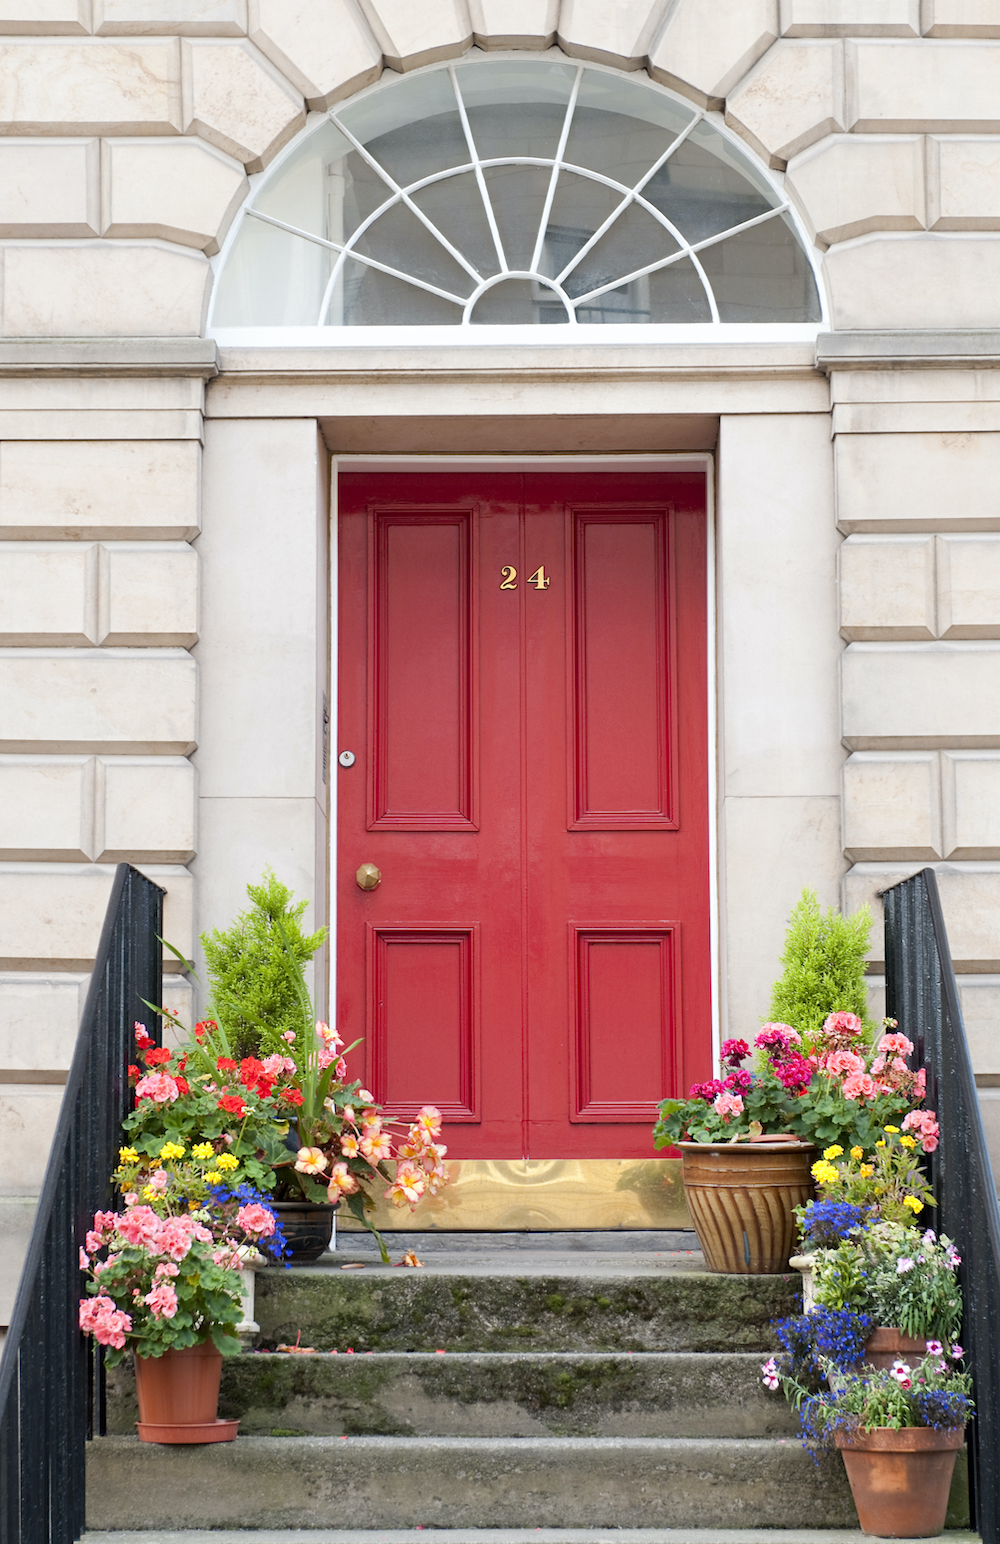 Flowers decorating the steps in front of a red door with brass 21 numerals on it in a grand white house